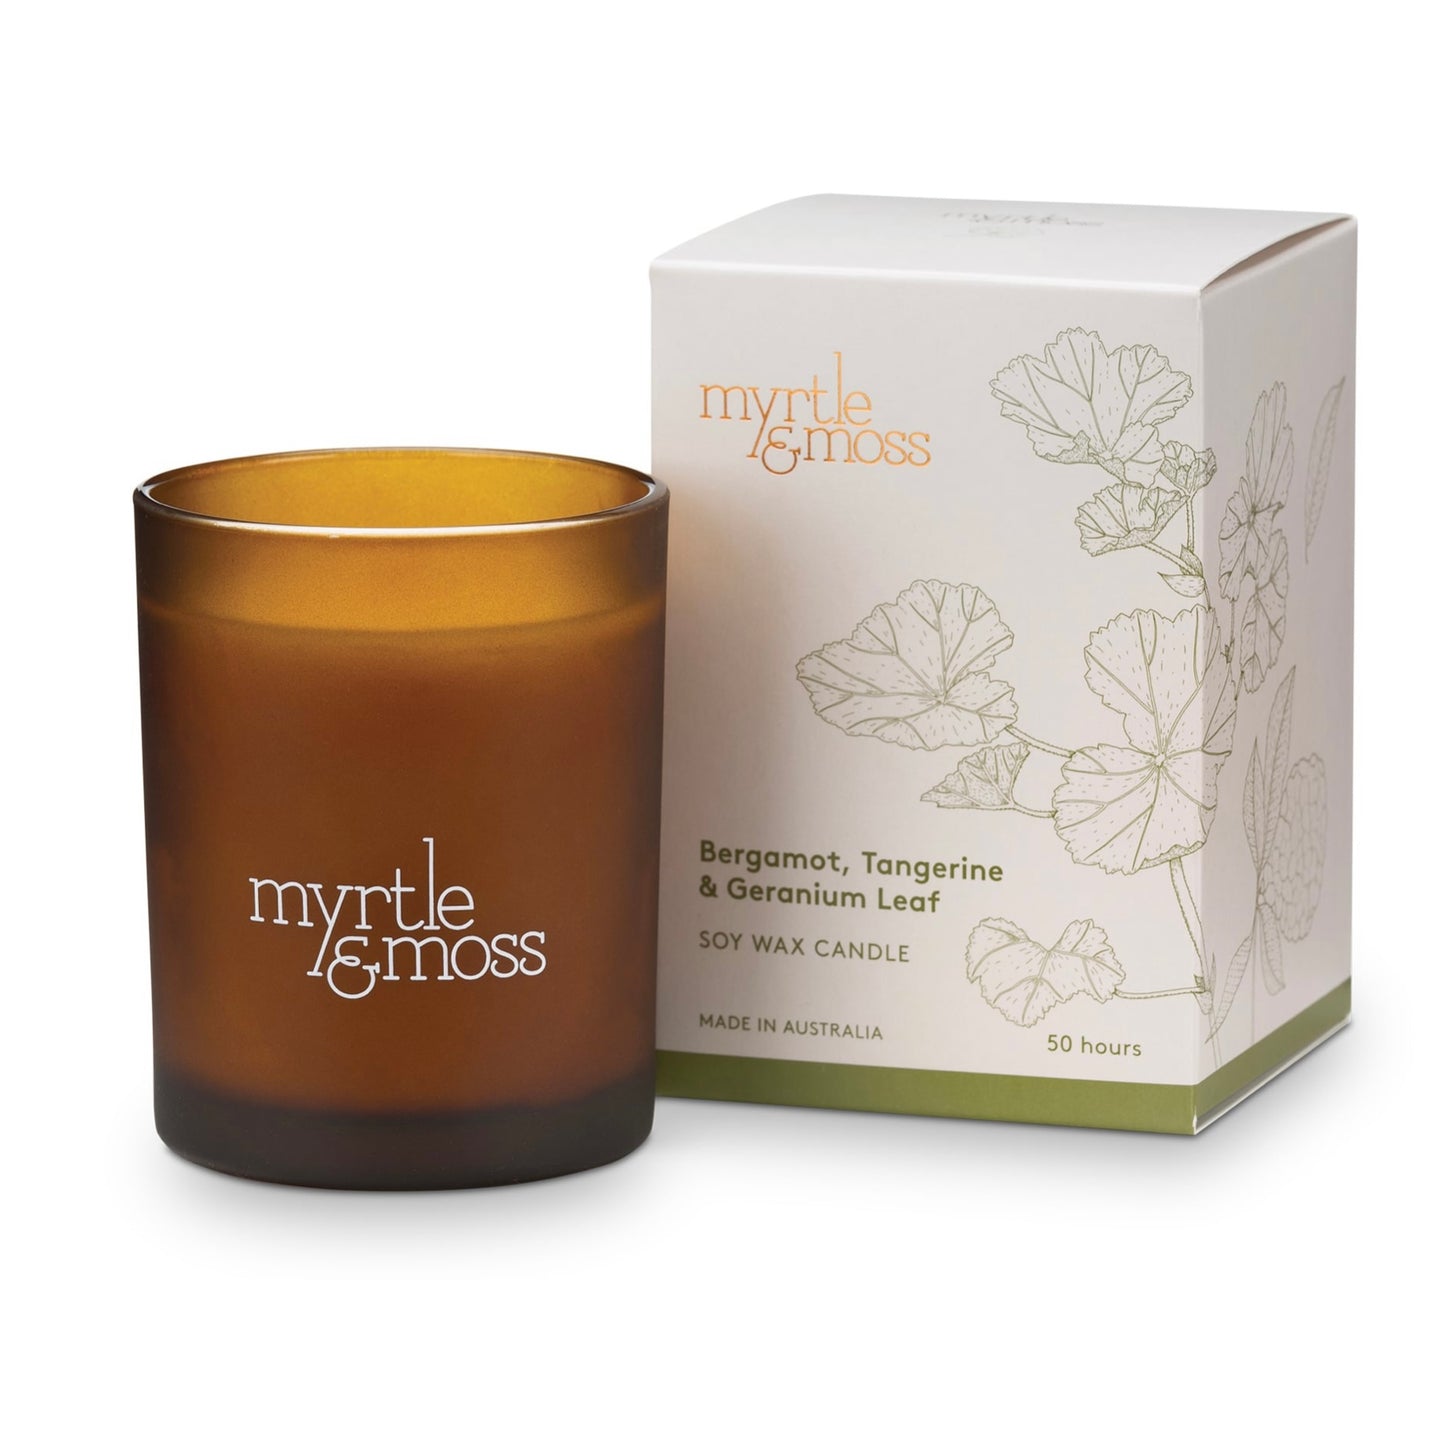 Myrtle & Moss Soy wax candle